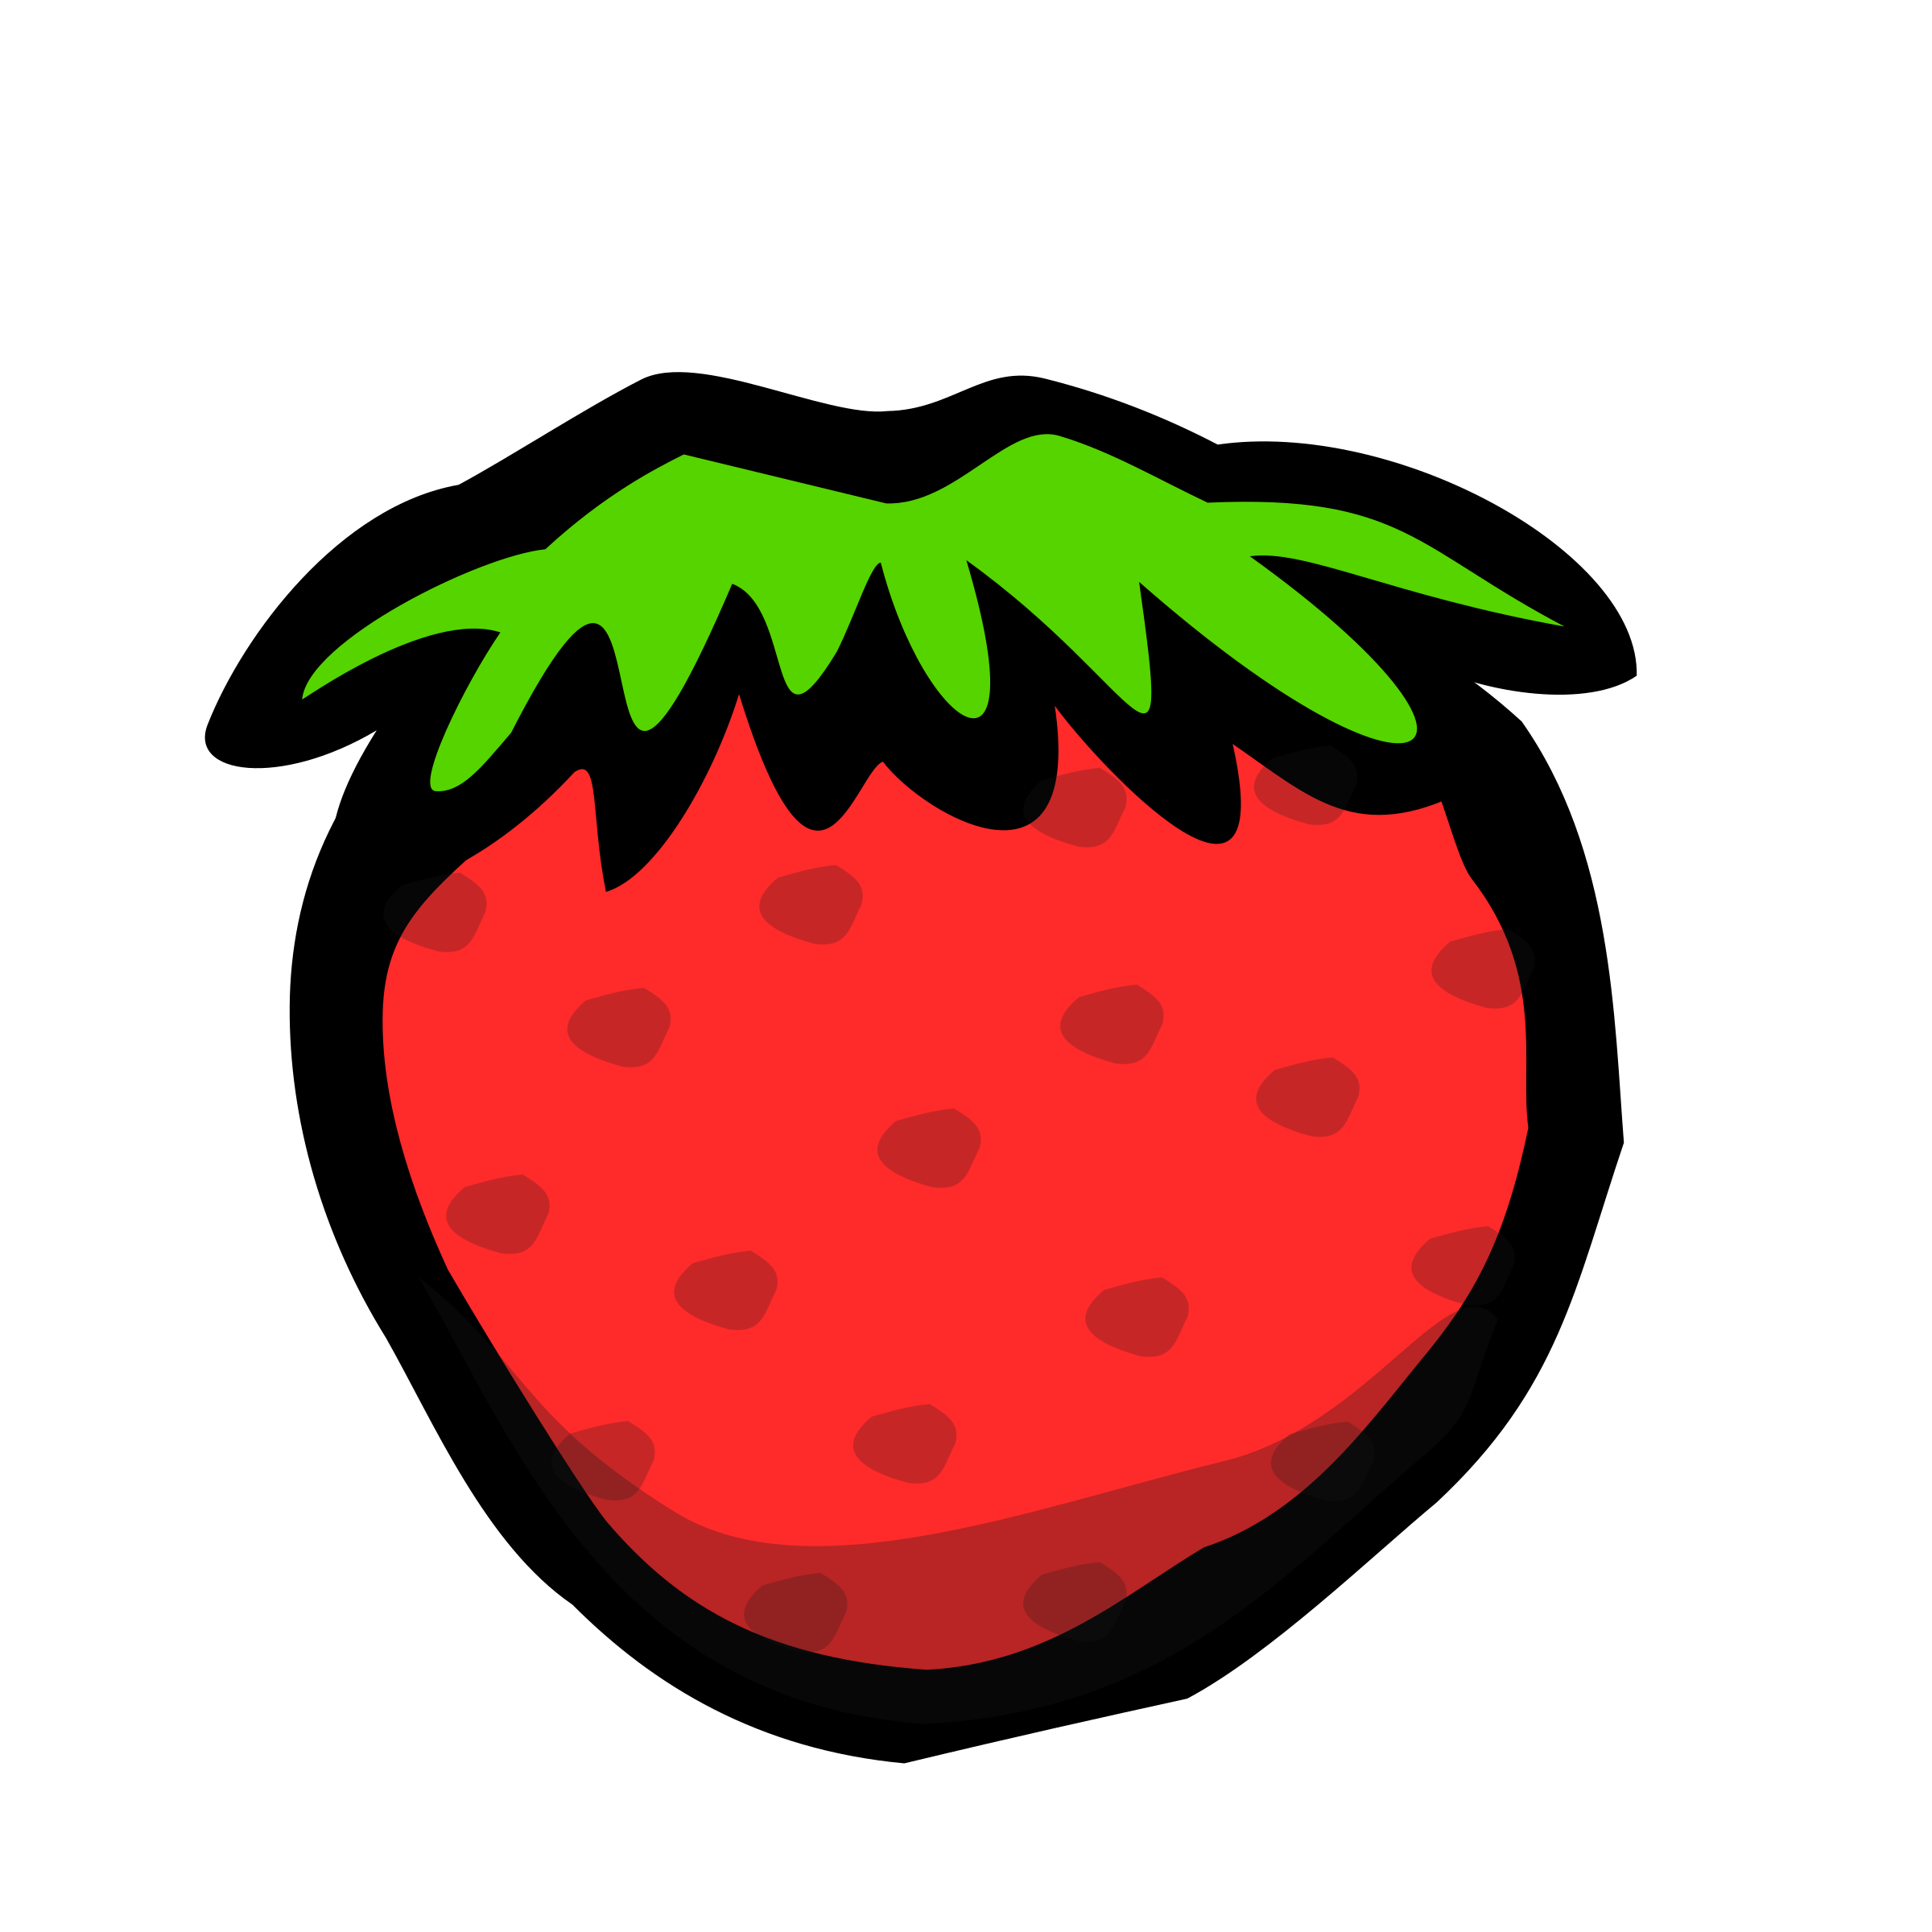 Strawberries clipart watermelon. Strawberry big image png